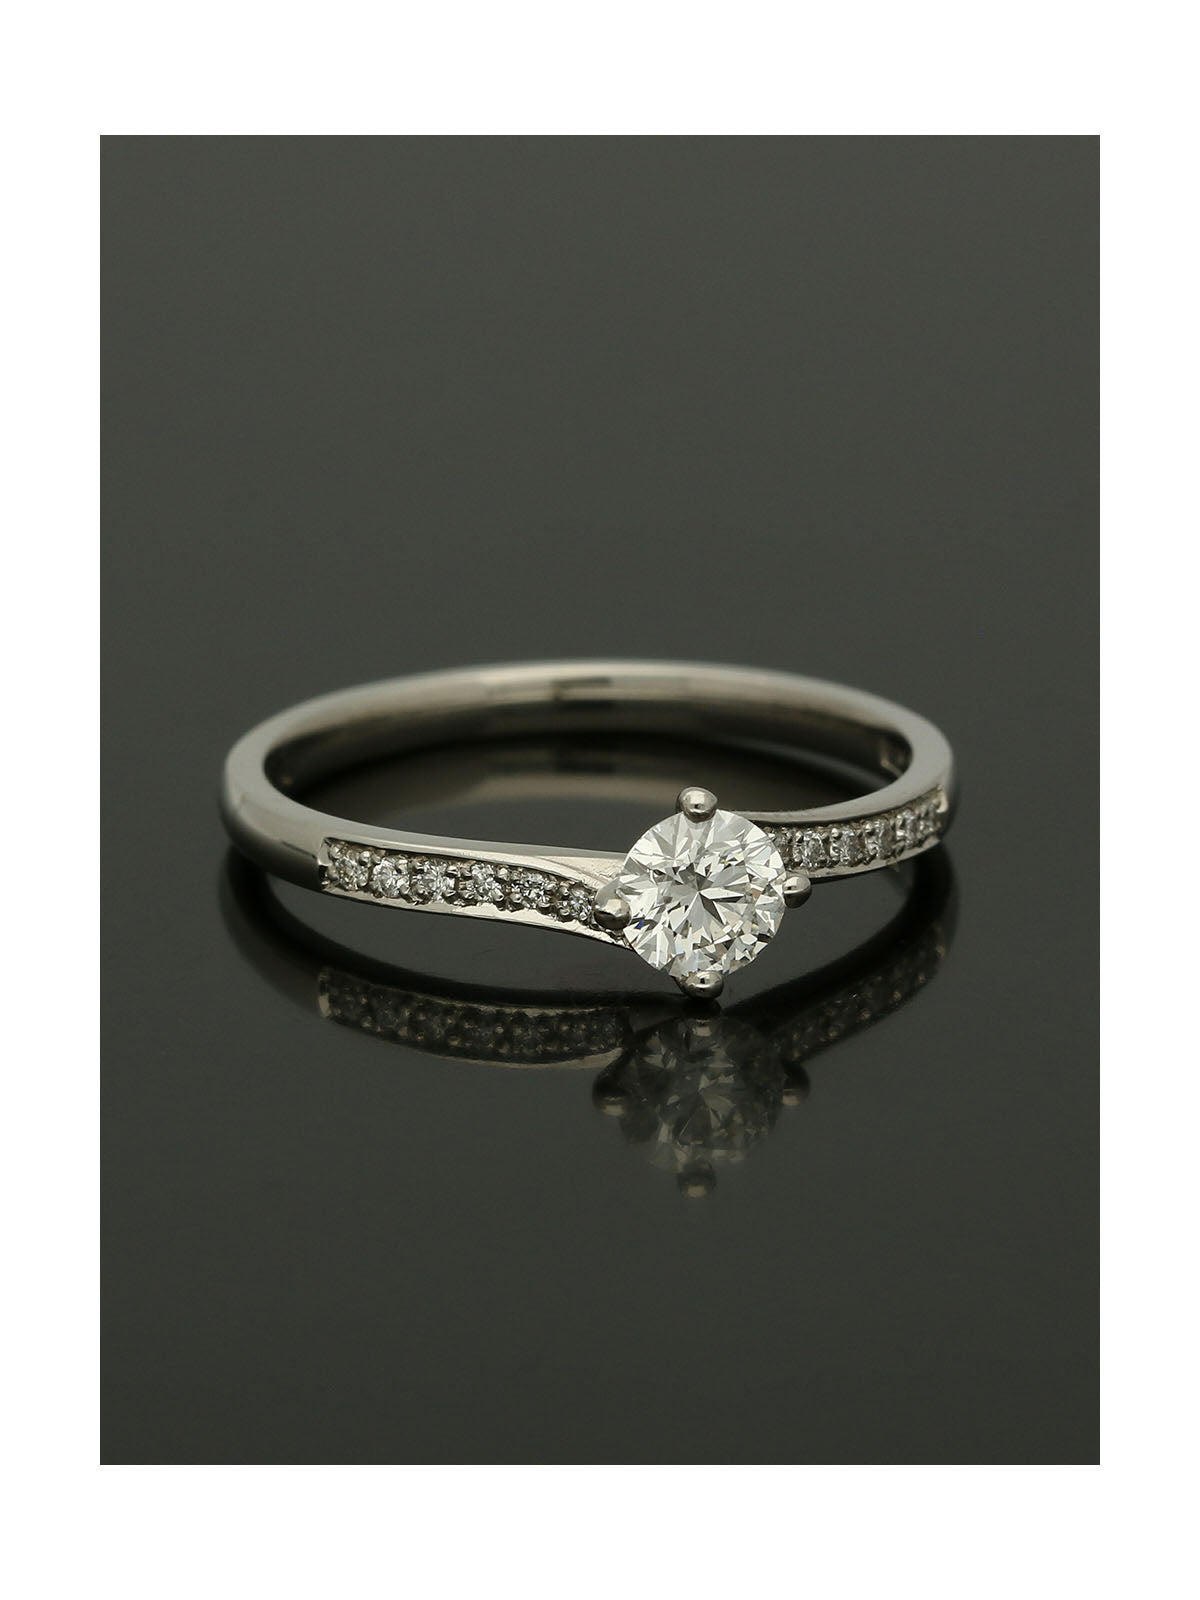 Diamond Solitaire Engagement Ring 0.40ct Certificated Round Brilliant Cut in Platinum with Diamond Set Shoulders